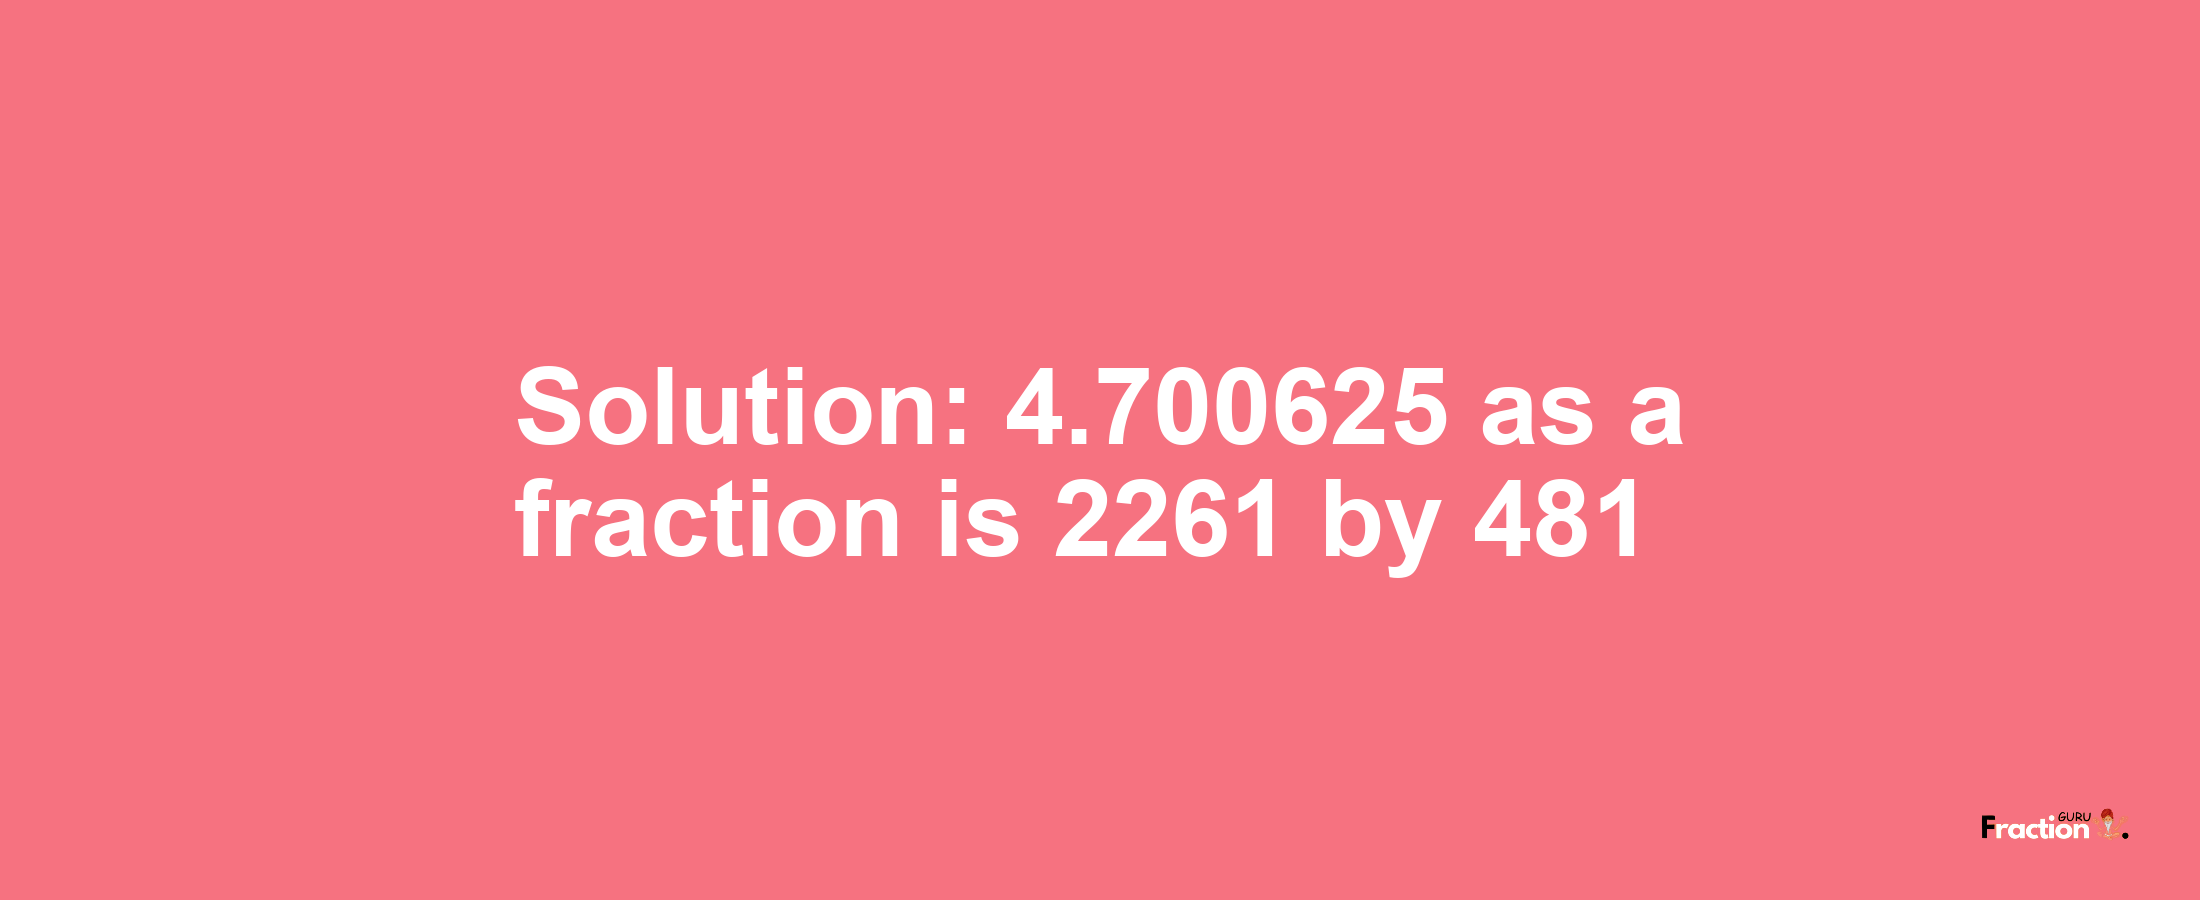 Solution:4.700625 as a fraction is 2261/481